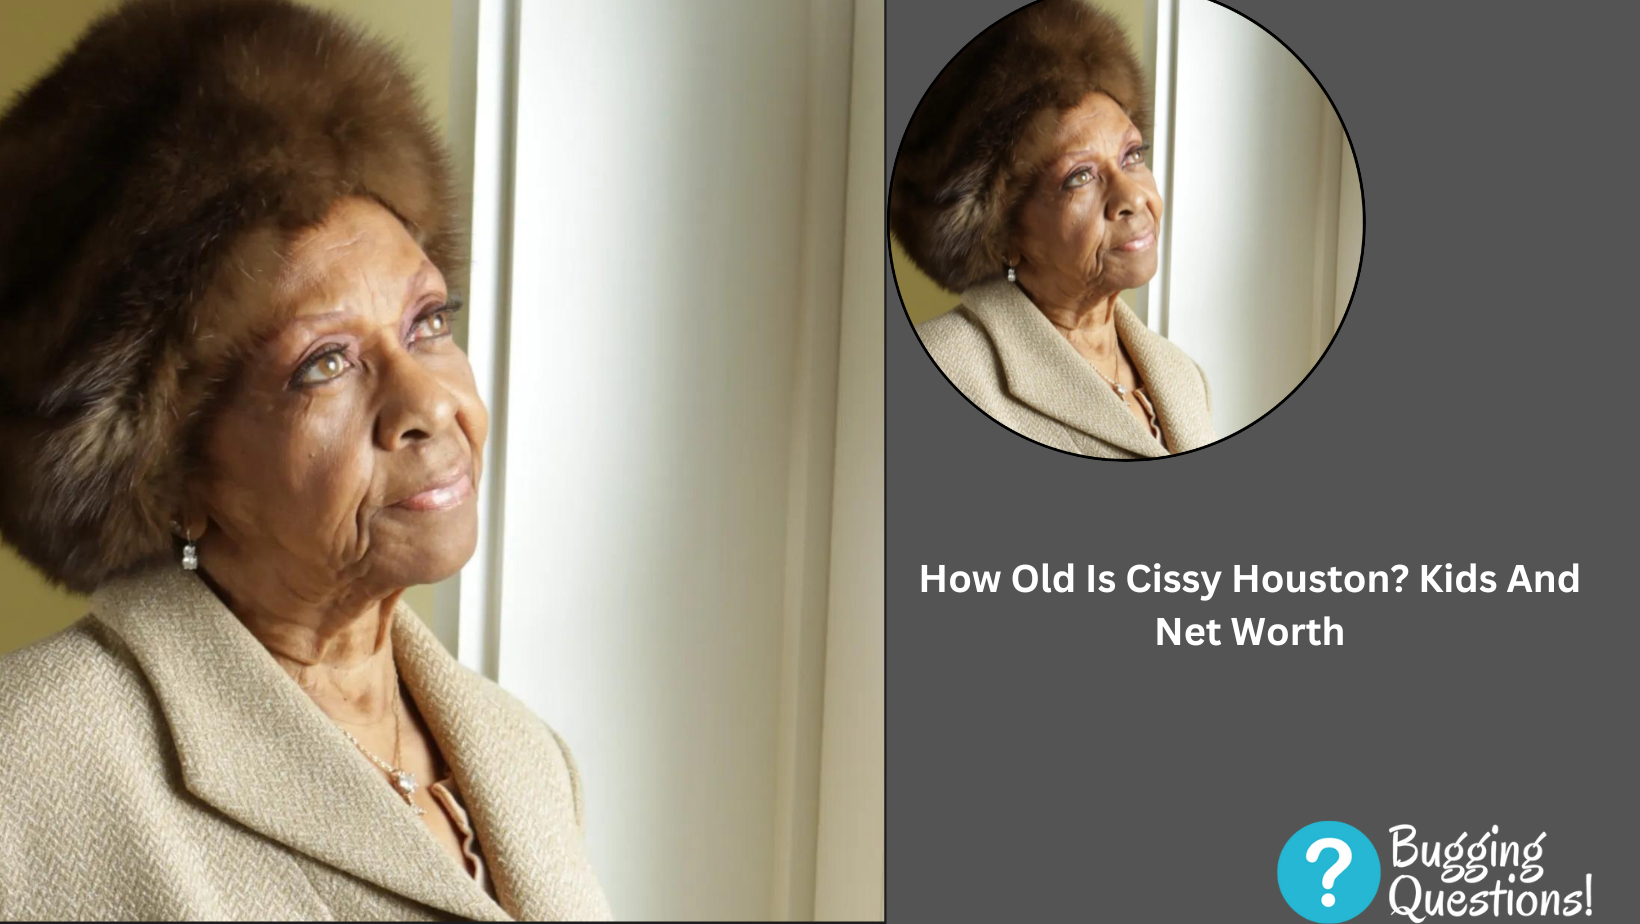 How Old Is Cissy Houston?